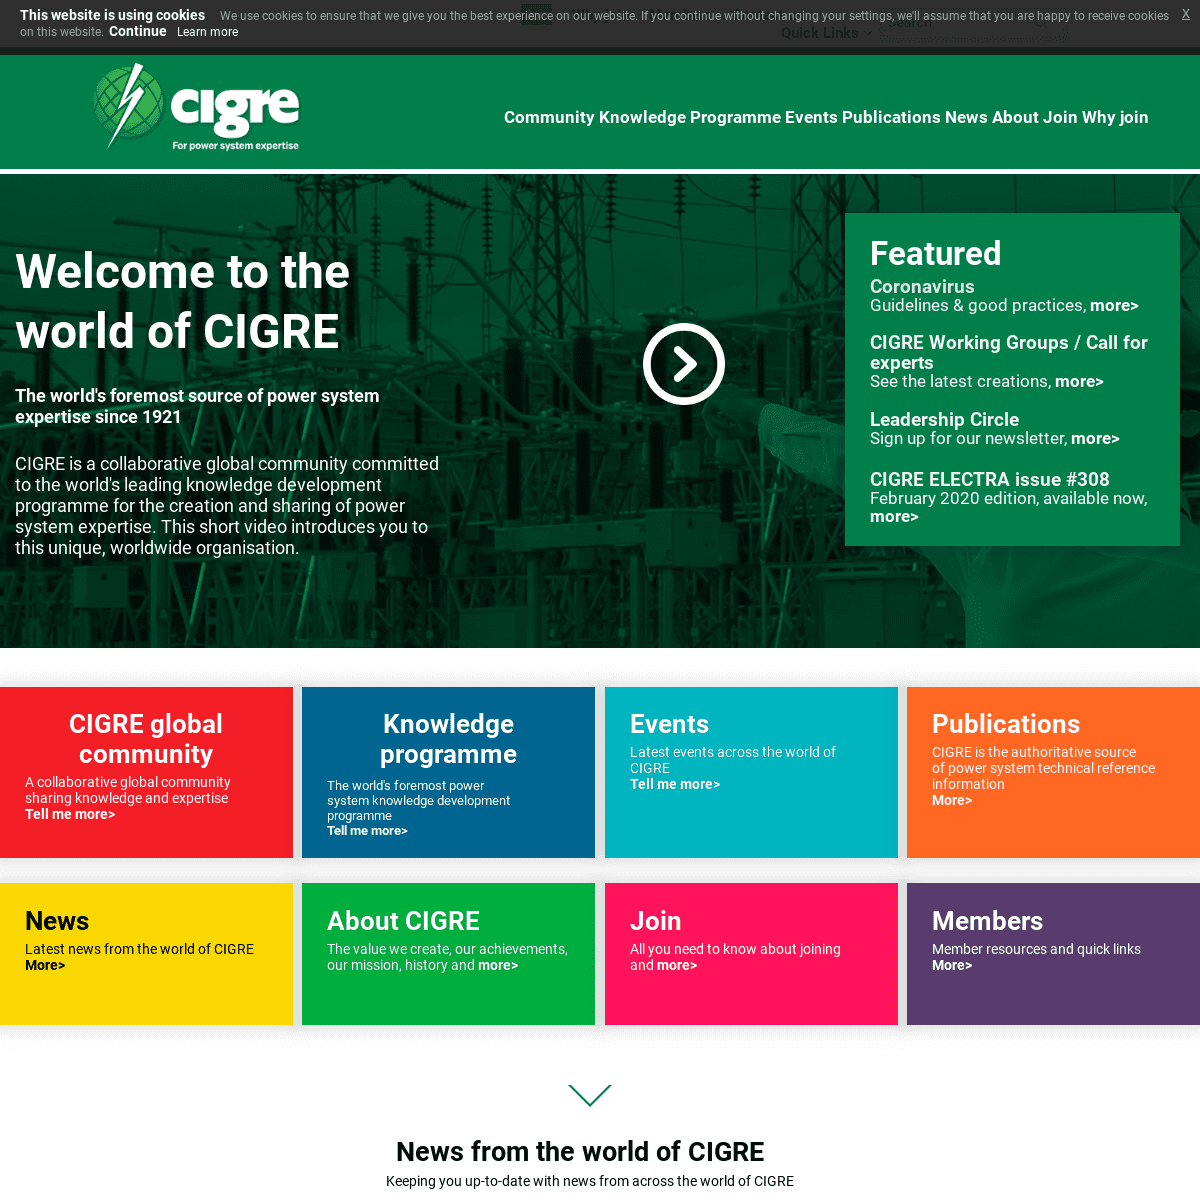 A complete backup of cigre.org